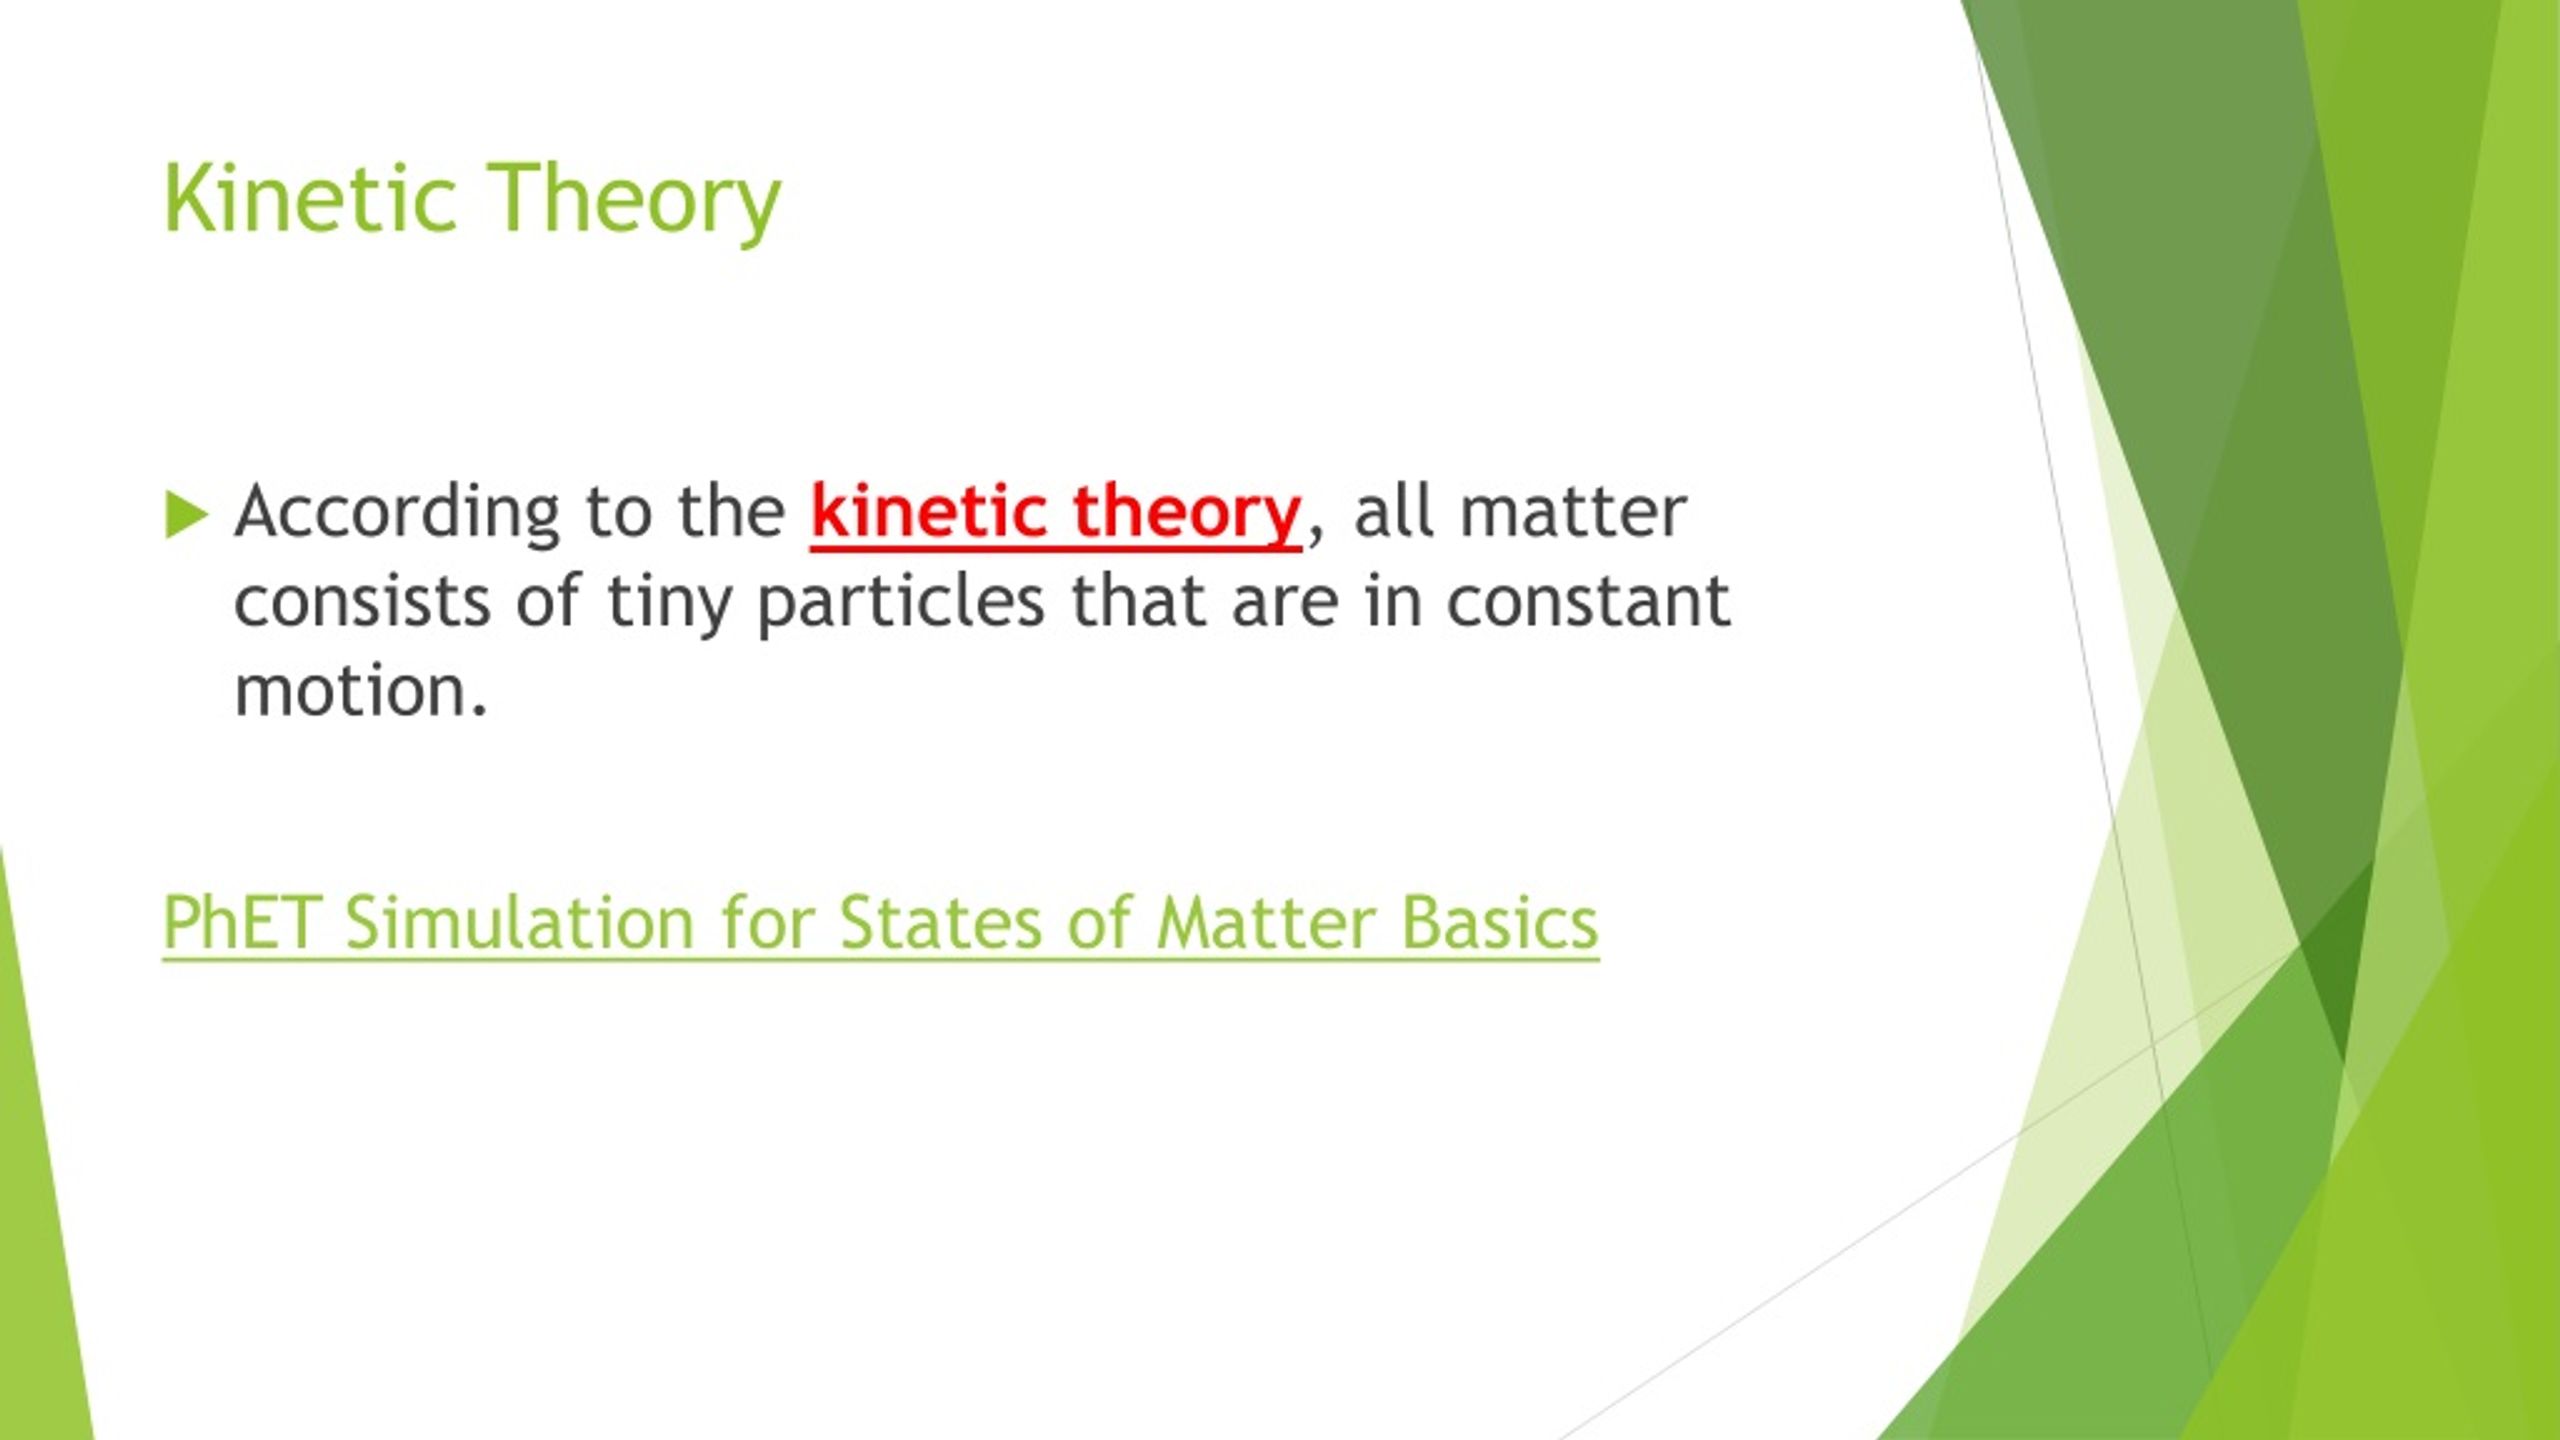 what does the word kinetic theory mean